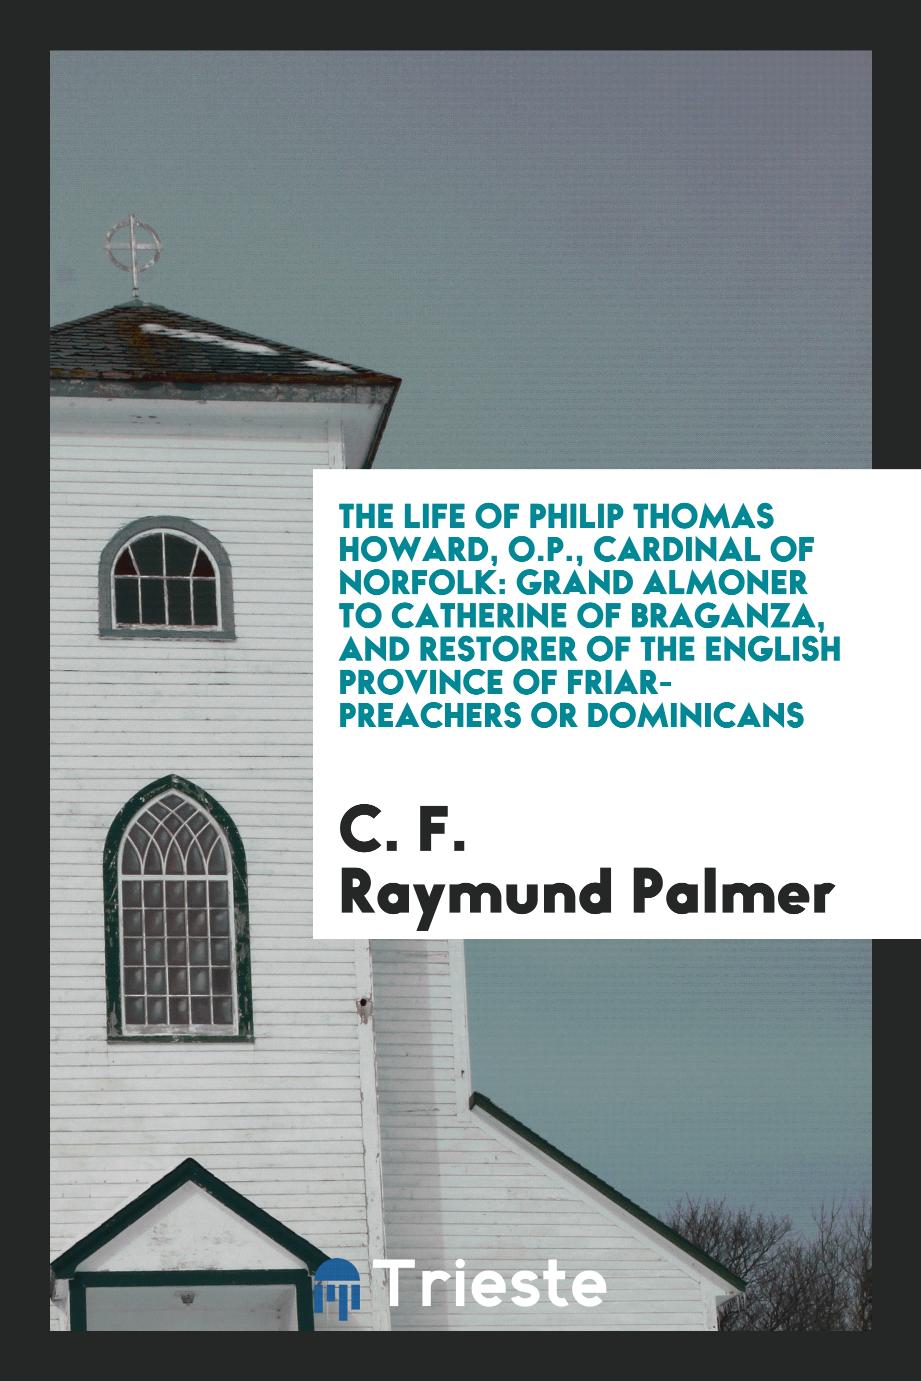 The life of Philip Thomas Howard, O.P., Cardinal of Norfolk: grand almoner to Catherine of Braganza, and restorer of the English province of friar-preachers or Dominicans